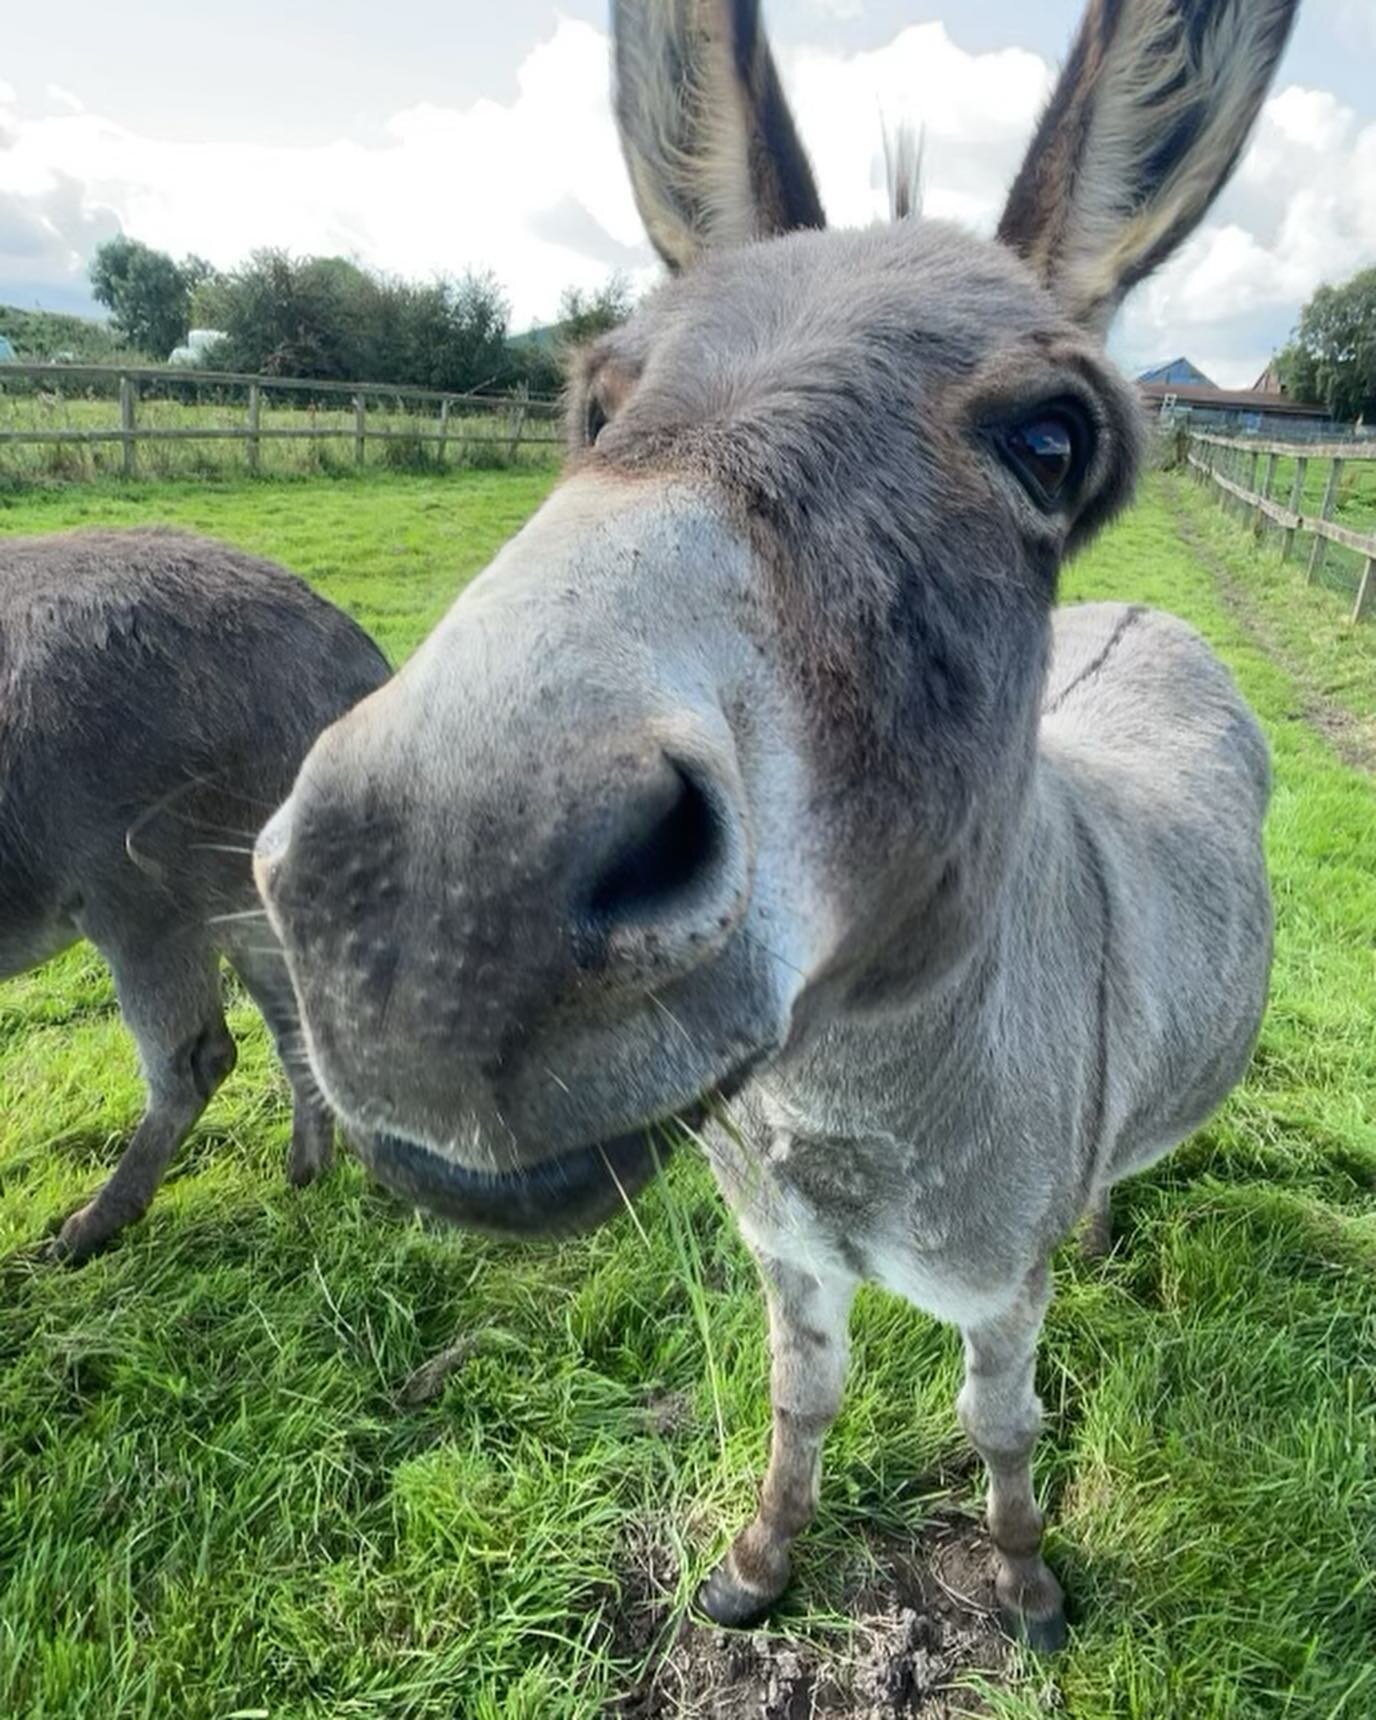 At todays Summer Event we decided to have a &lsquo;Name the Donkey&rsquo; suggestion list&hellip;&hellip; 🐴 we are partial to the name Pedro

What&rsquo;s your favourite???